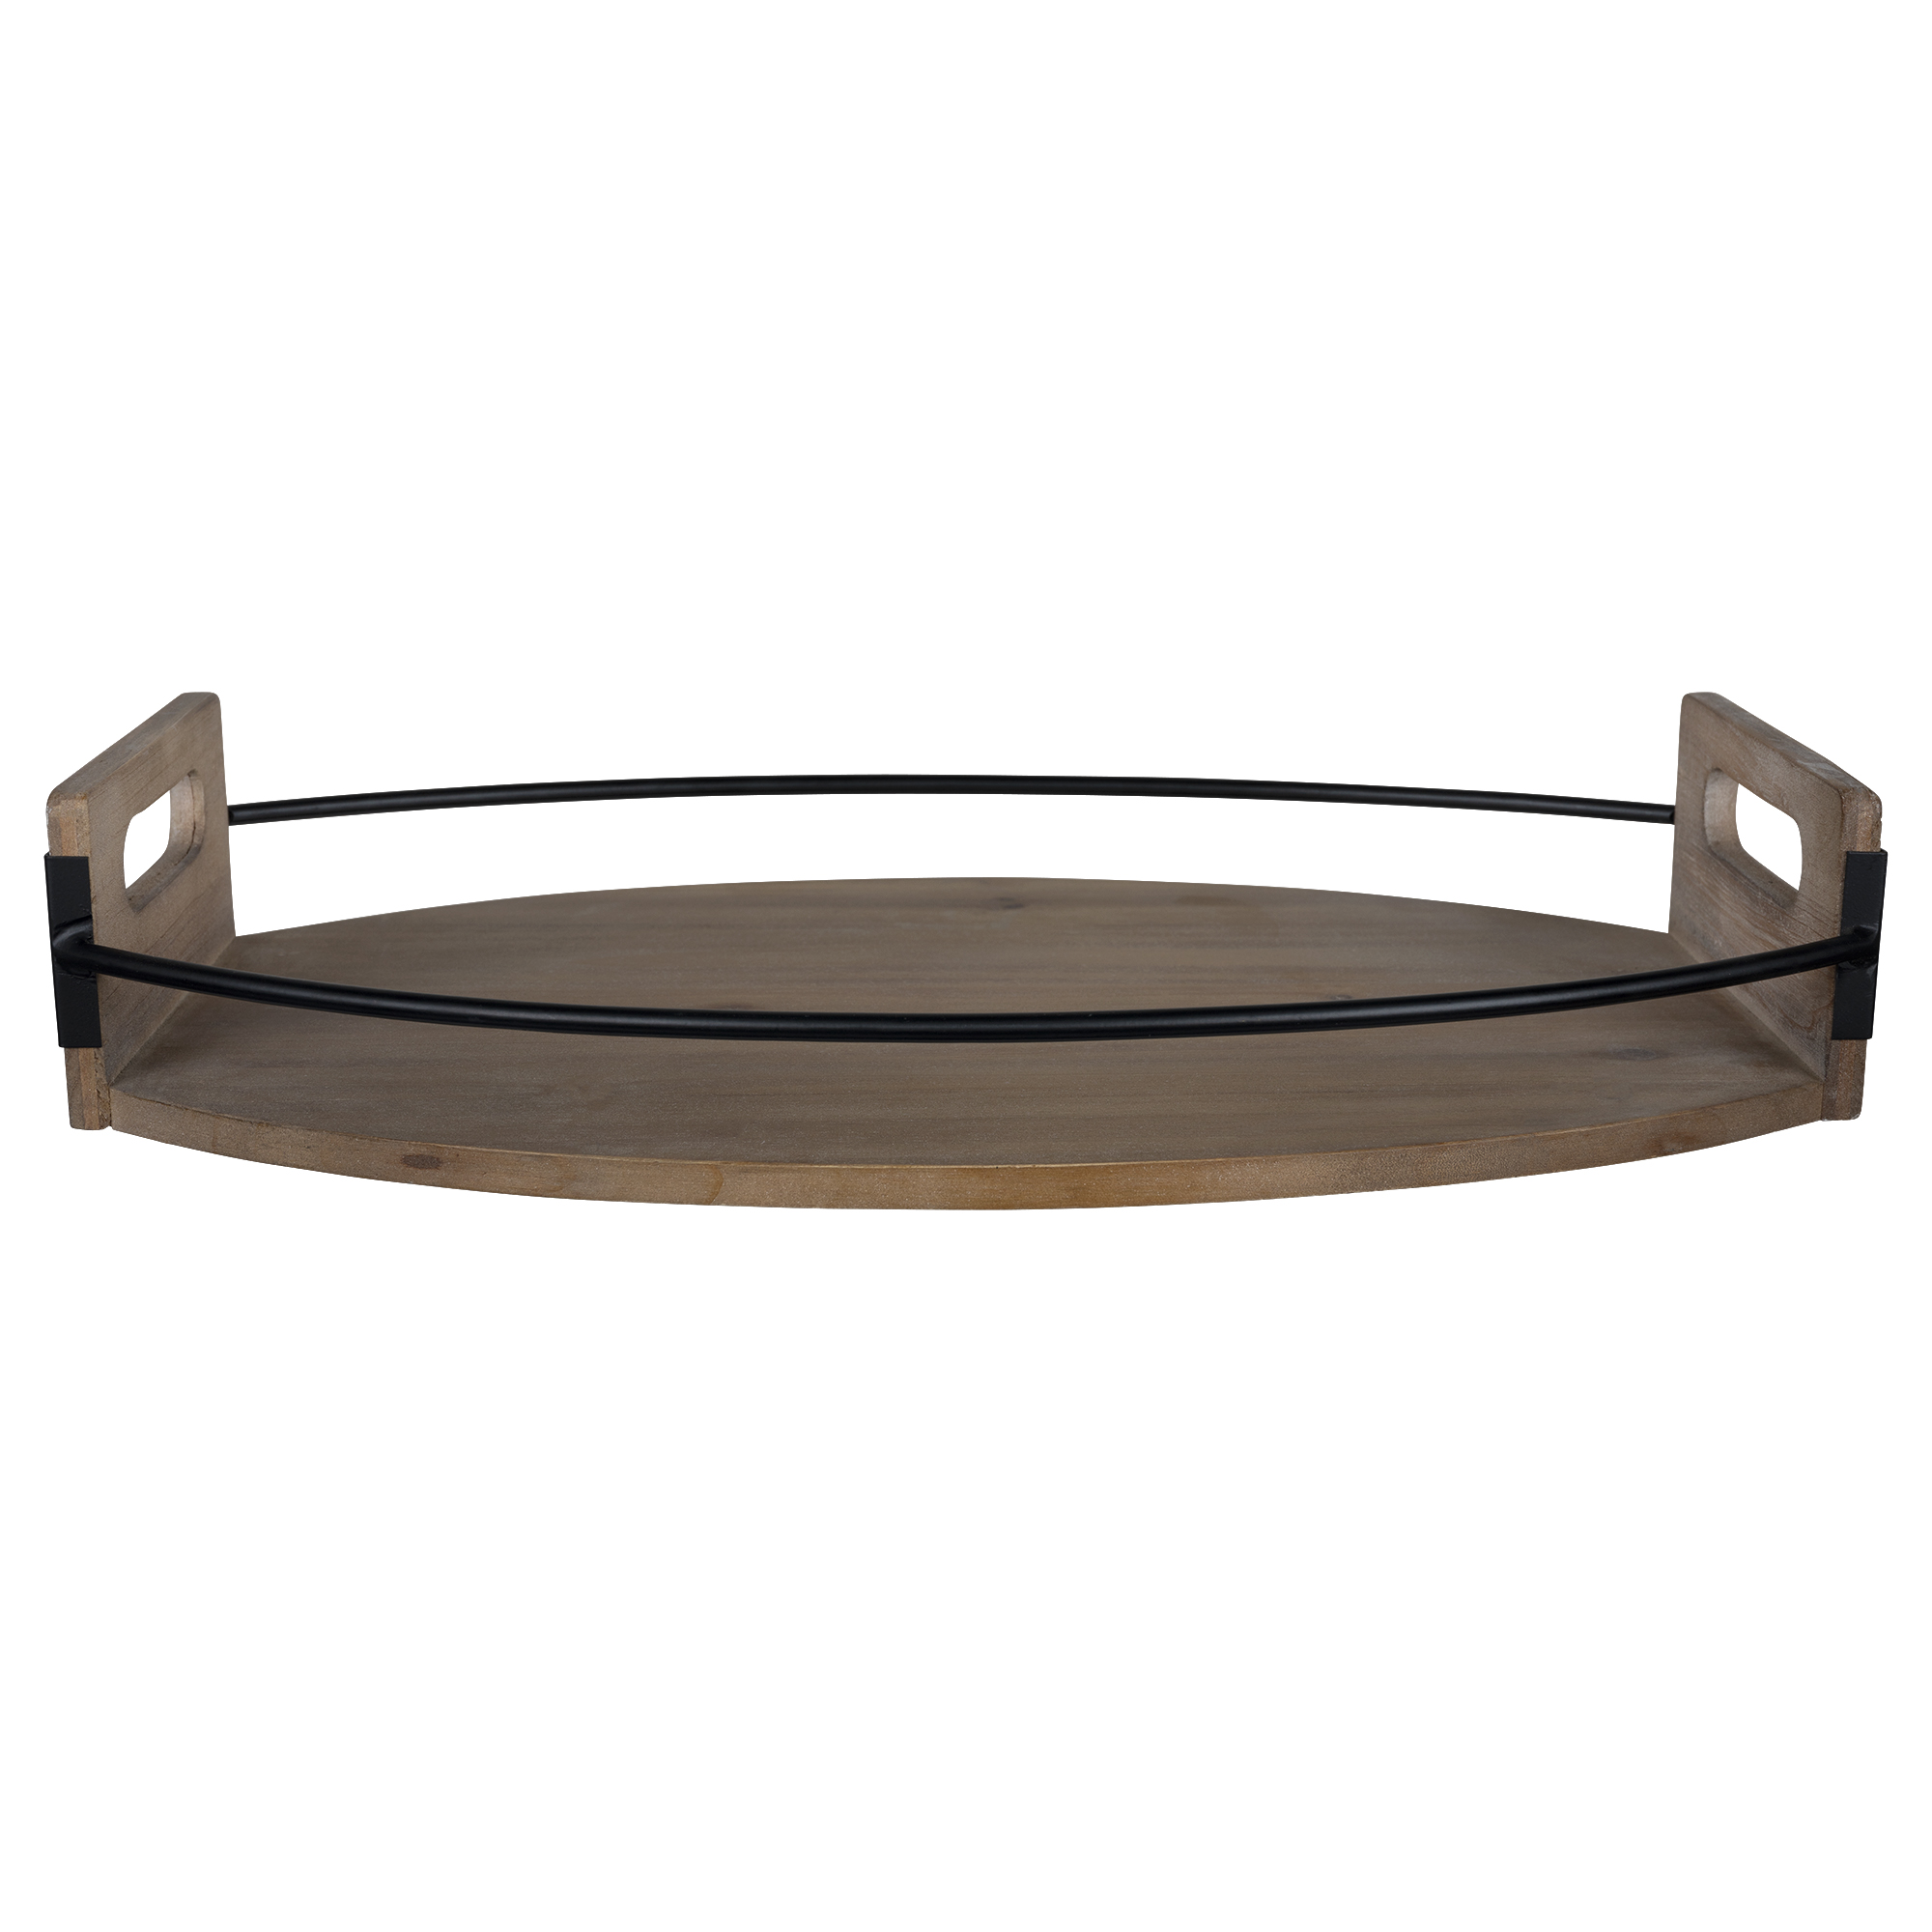 Stratton Home Decor Oval Wood and Metal Tray